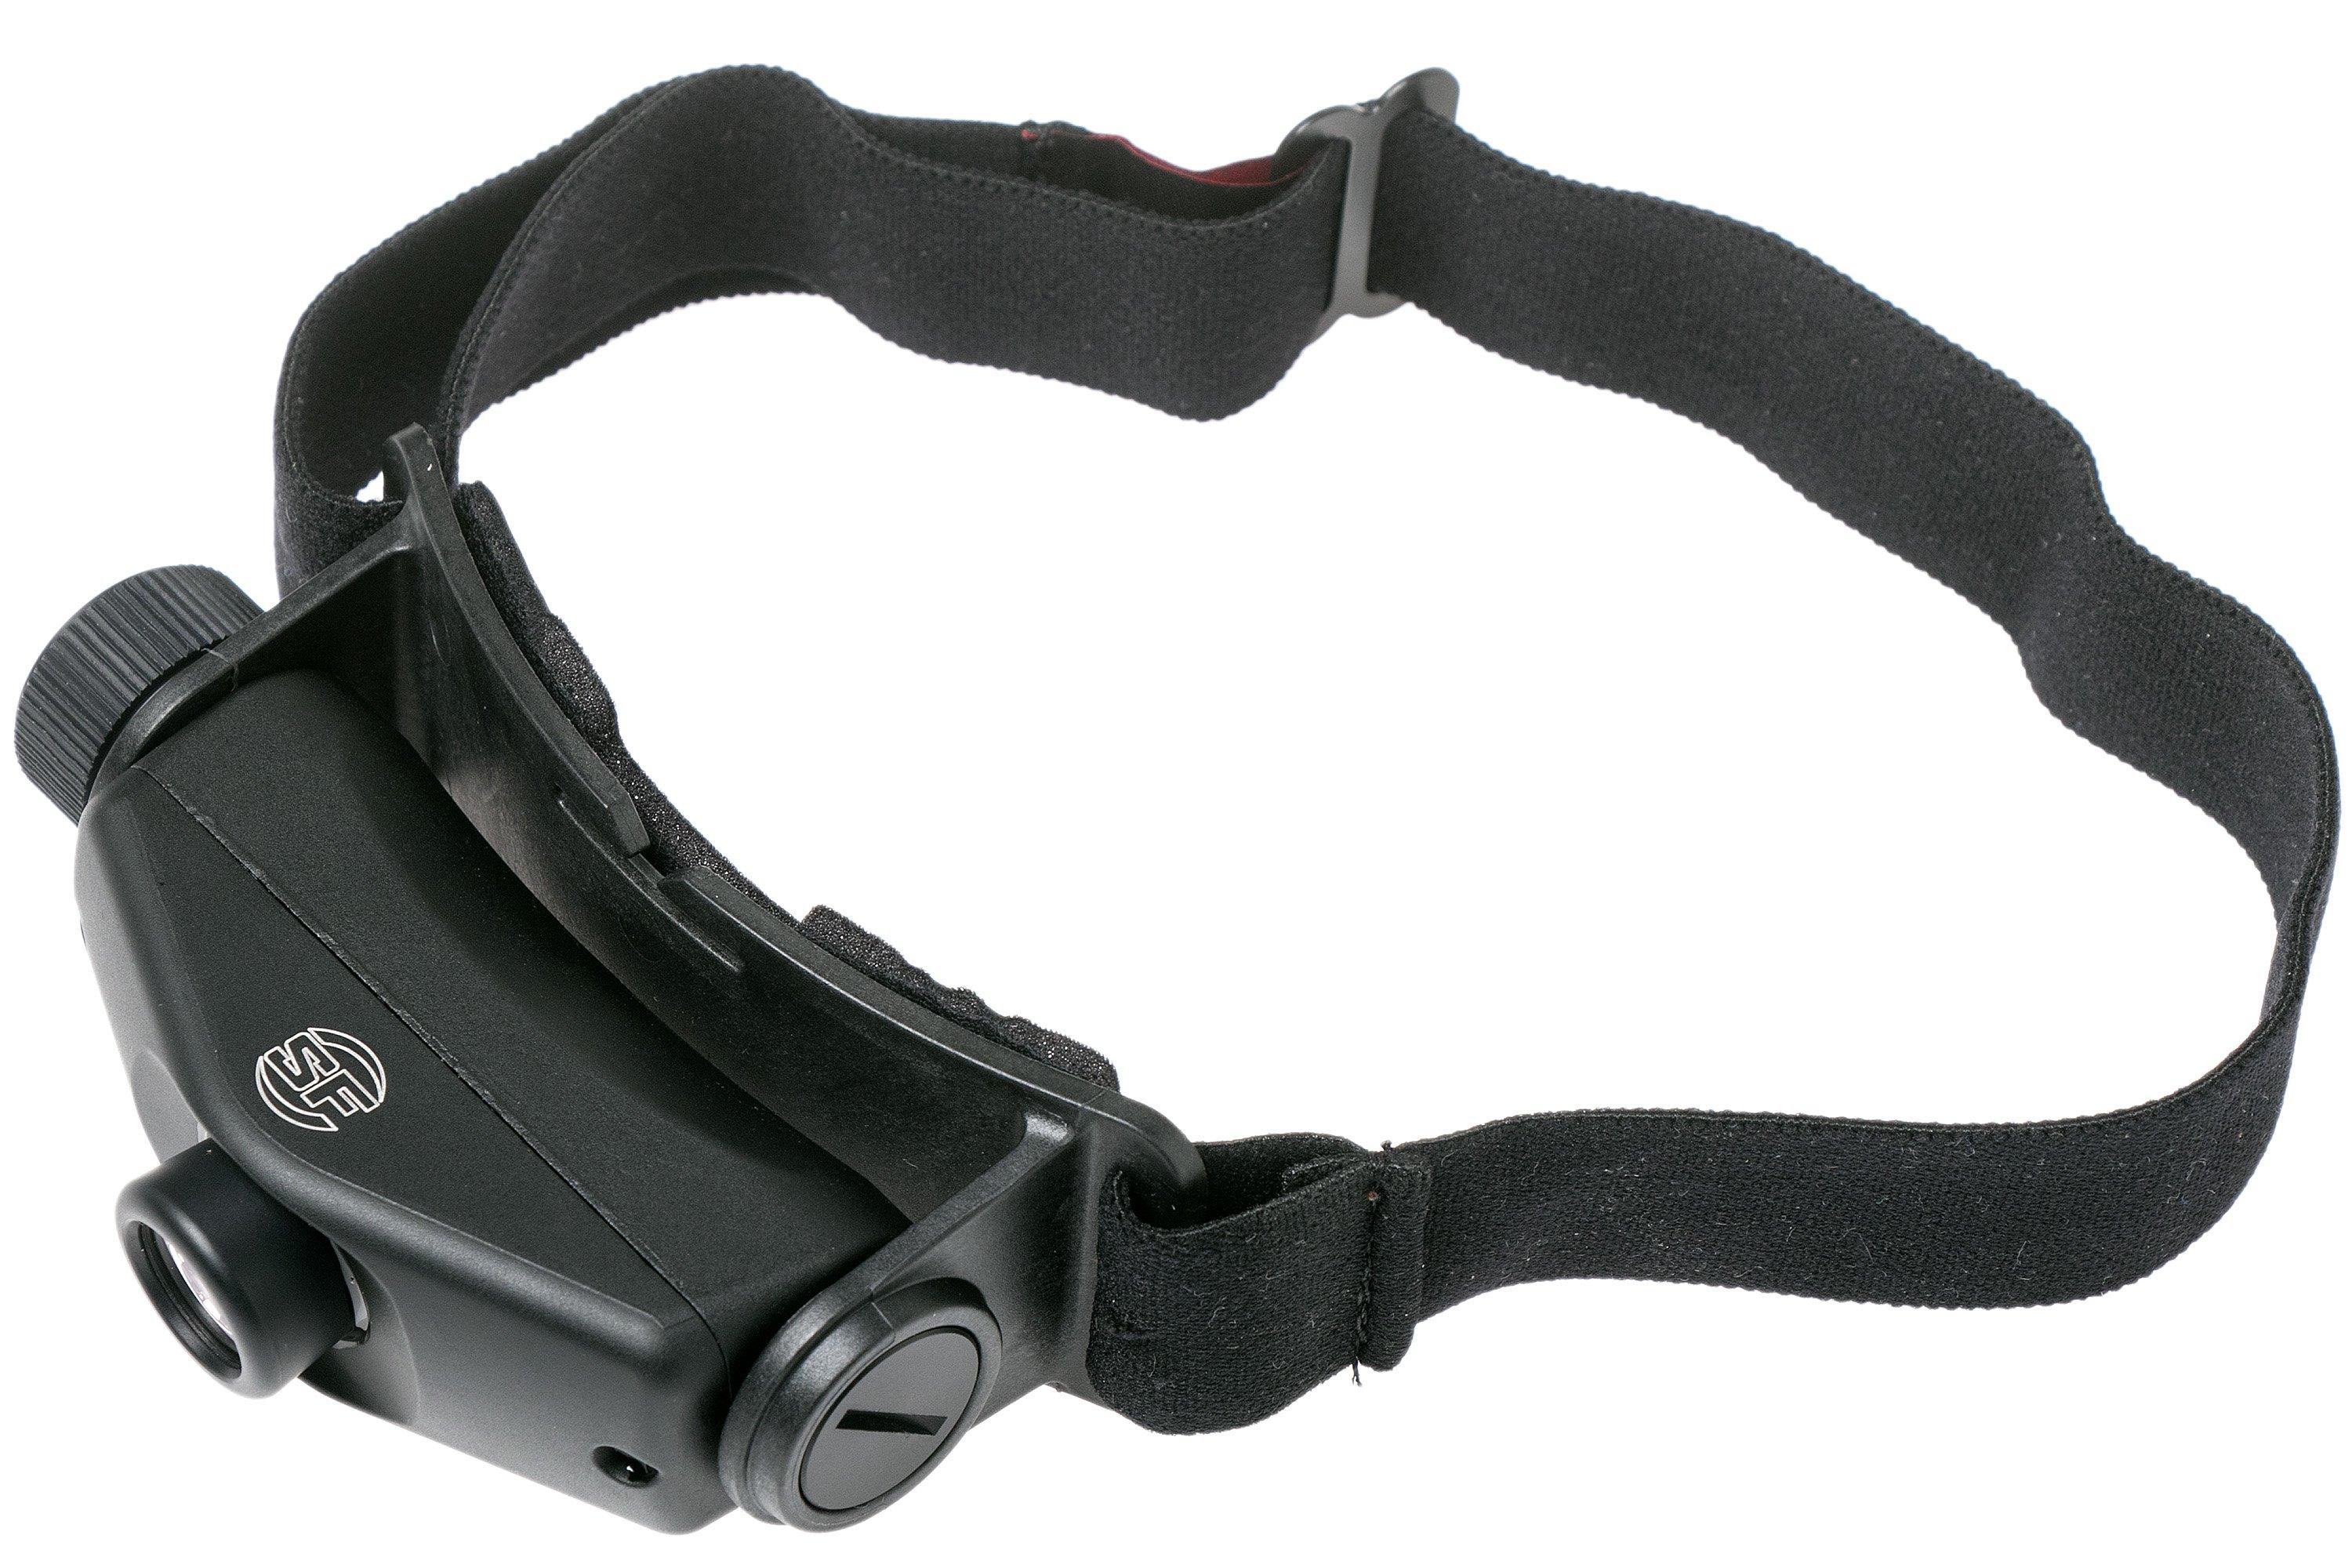 SureFire Maximus HS3 rechargeable LED head torch Advantageously shopping  at